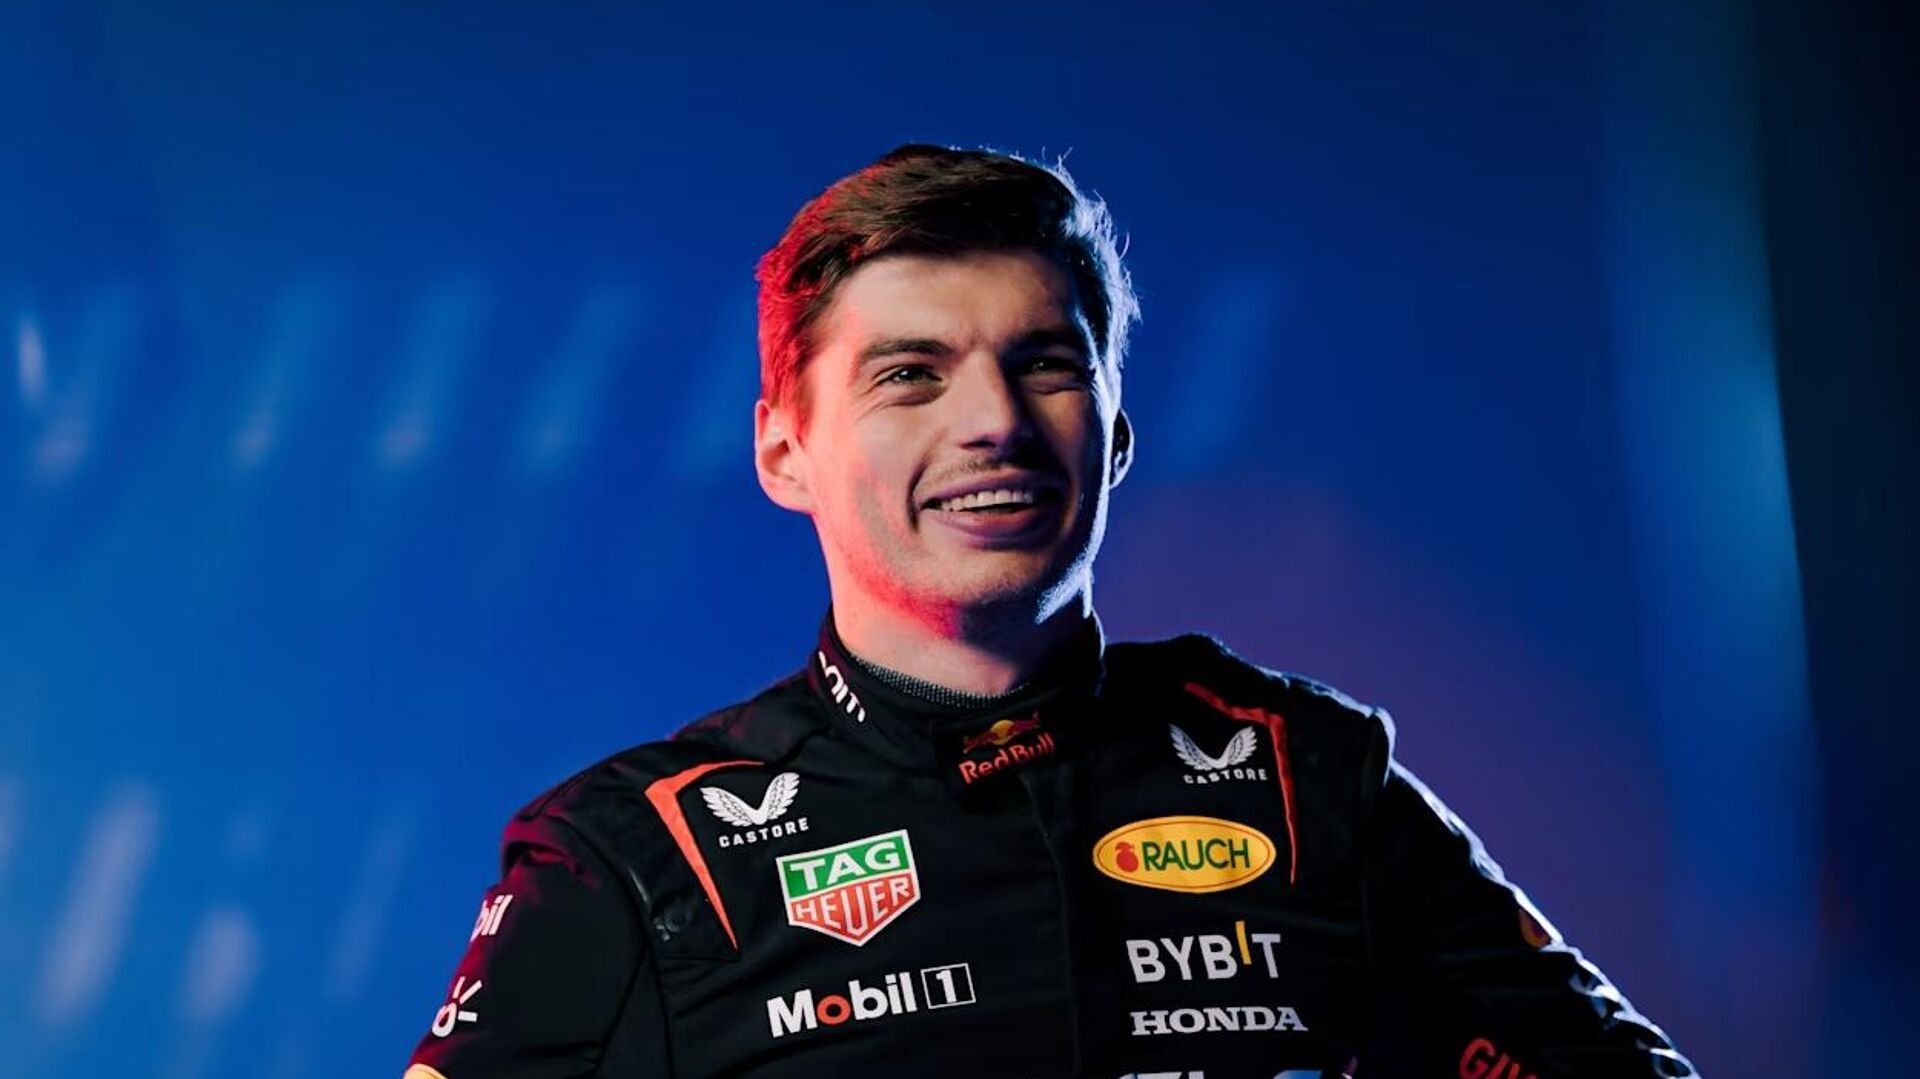 Red Bull Driver Max Verstappen Earns $81 Million Dollars This Year